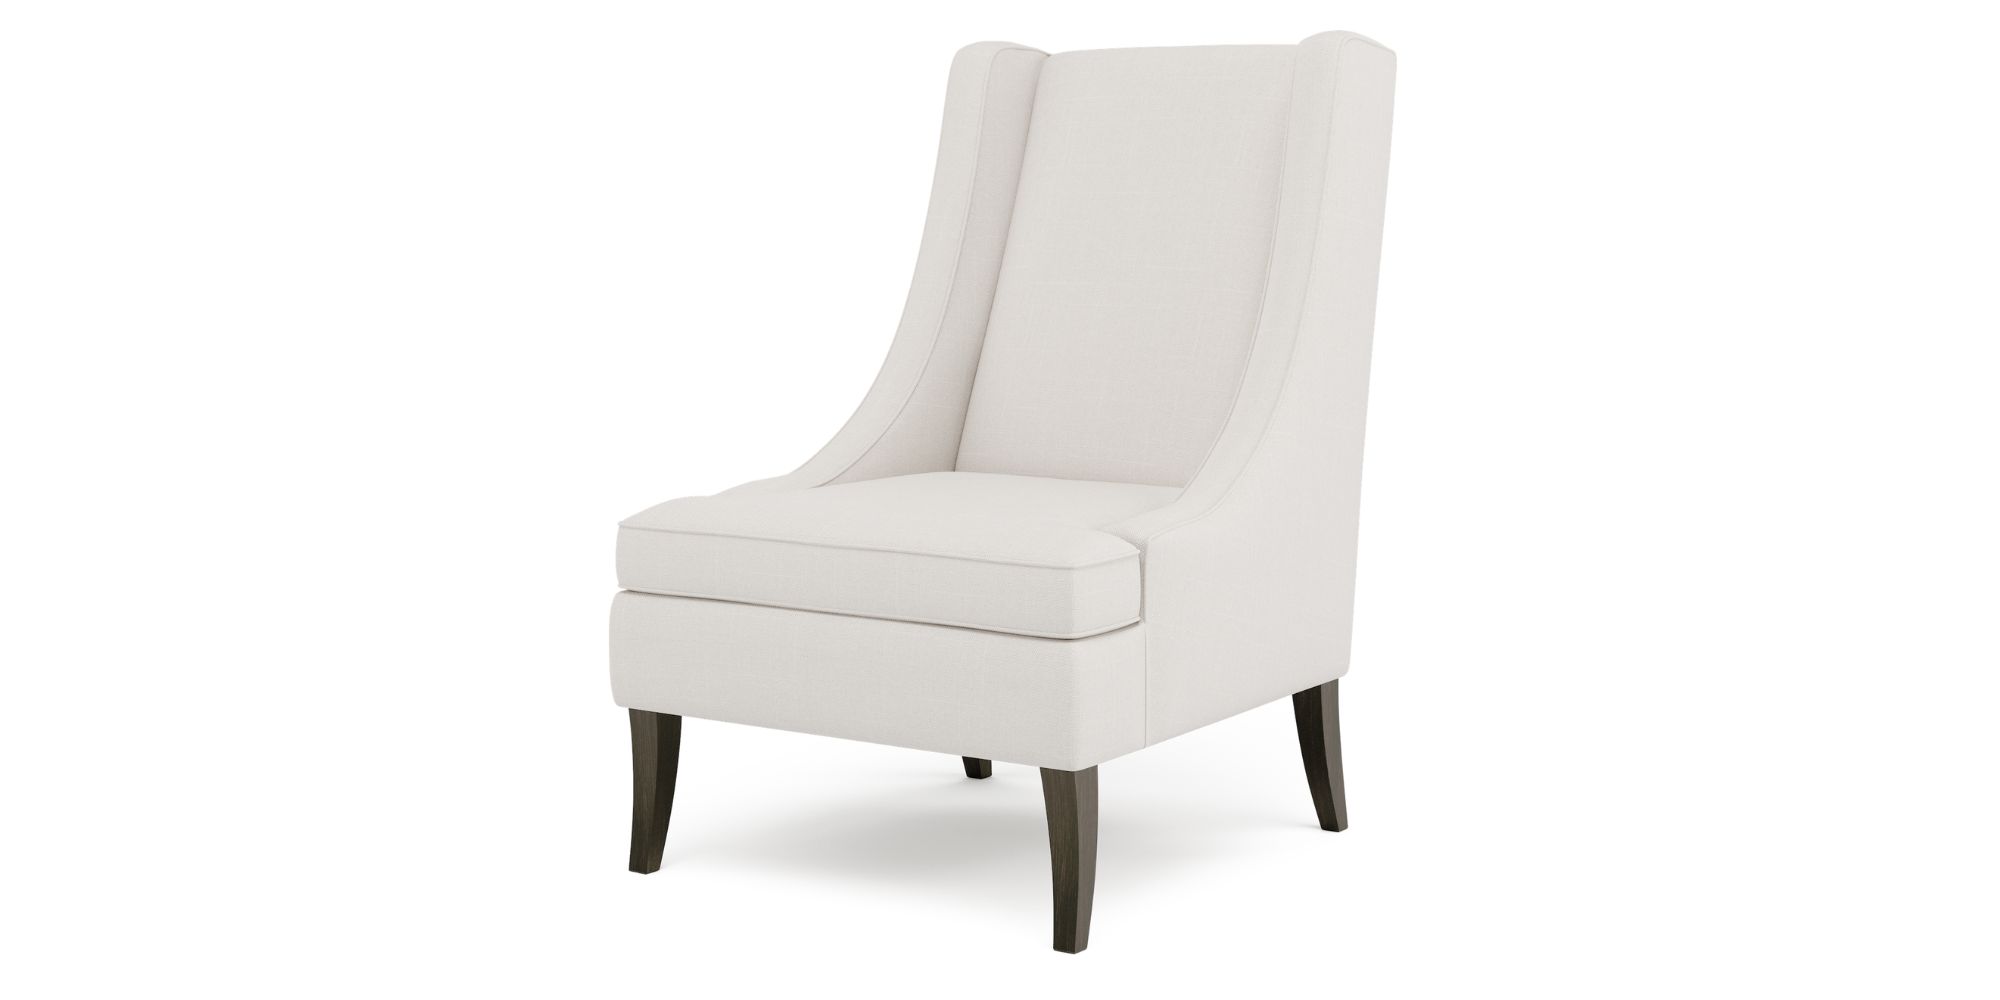 Porto Armchair in Outdoor Chairs for Porto collection